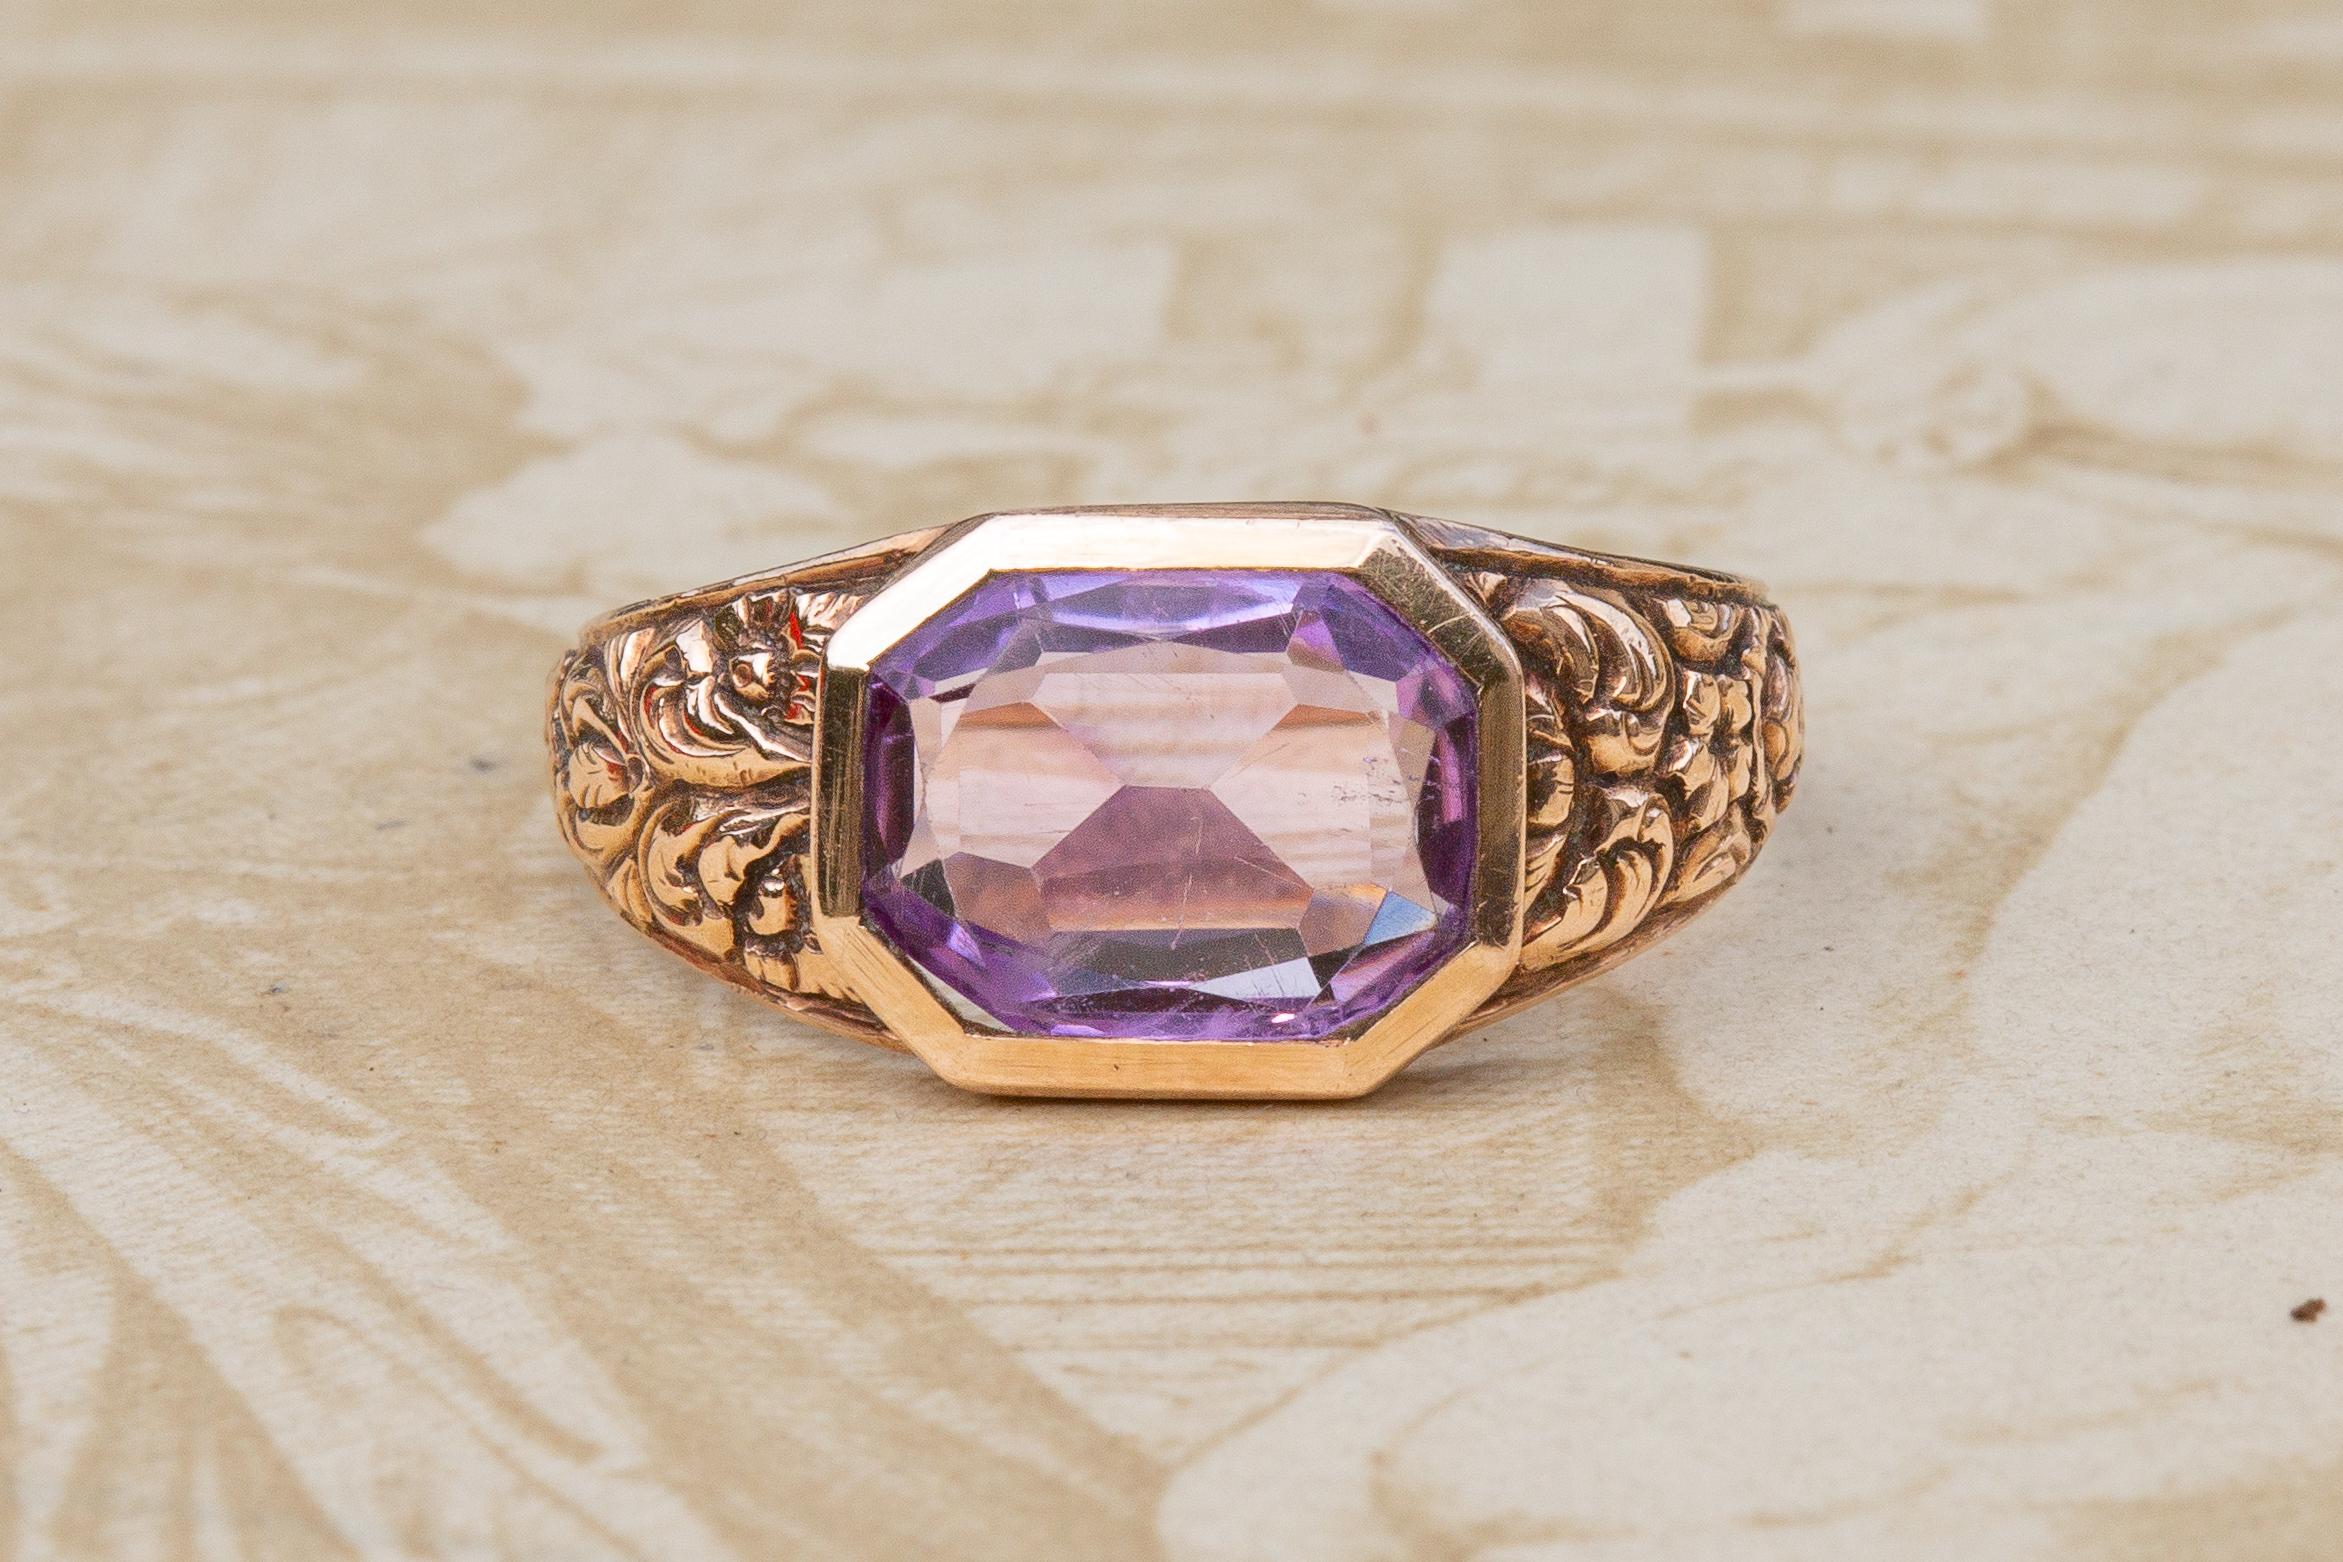 This beautiful, intricate piece dates to the late 19th century, and carries Austrian (Vienna) import hallmarks for 14K gold.  

The ring is set with a gorgeous open-backed 2.5ct ‘Rose de France’ hued amethyst in a raised octagonal bezel setting. The